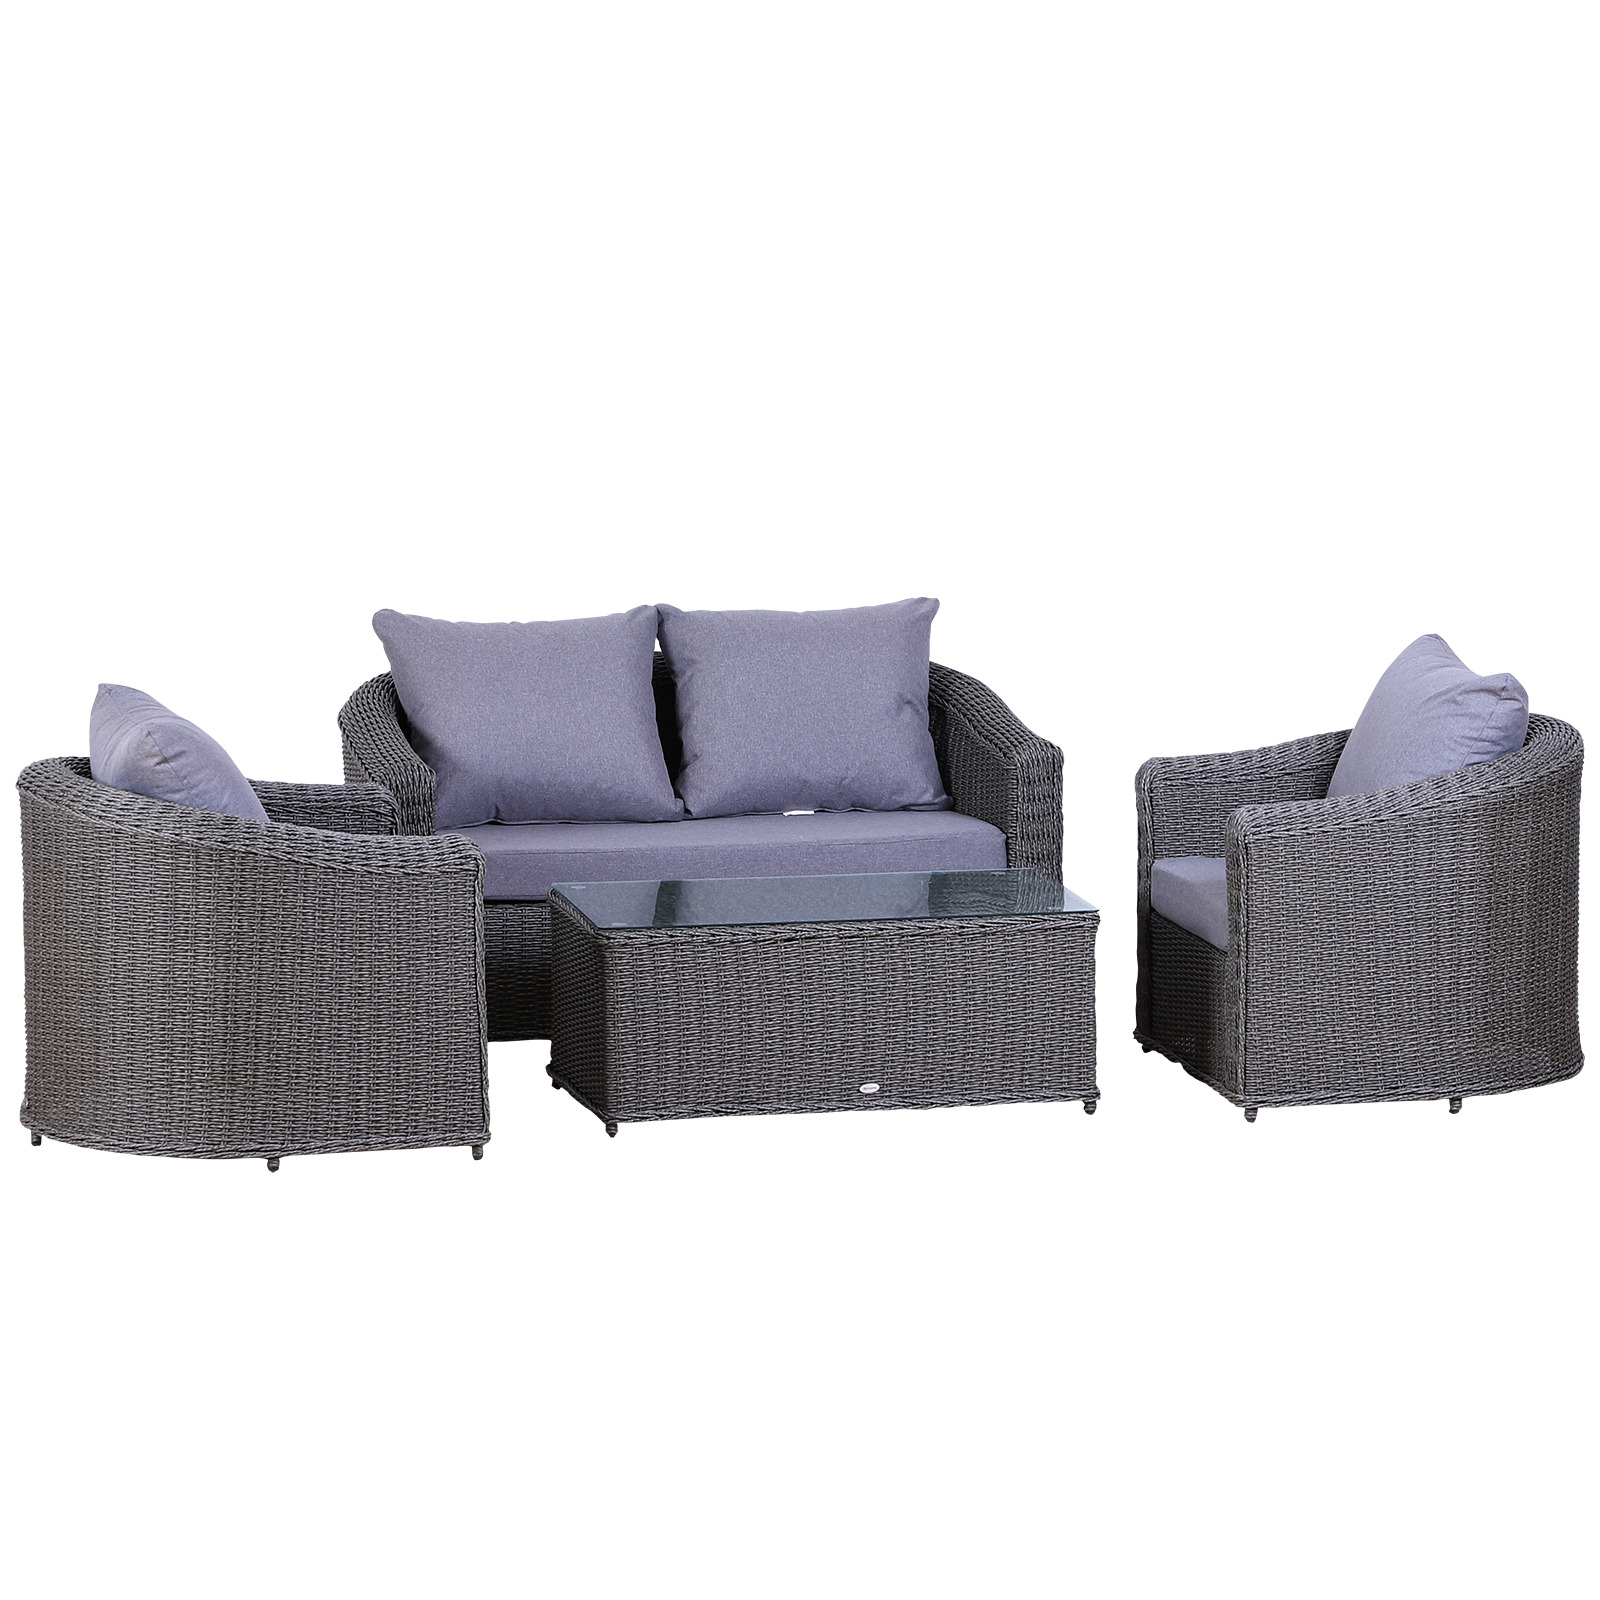 Outsunny Rattan Garden Furniture Set 4-seater Sofa Set Coffee Table Single Chair Bench Aluminium Frame Fully-assembly, Grey